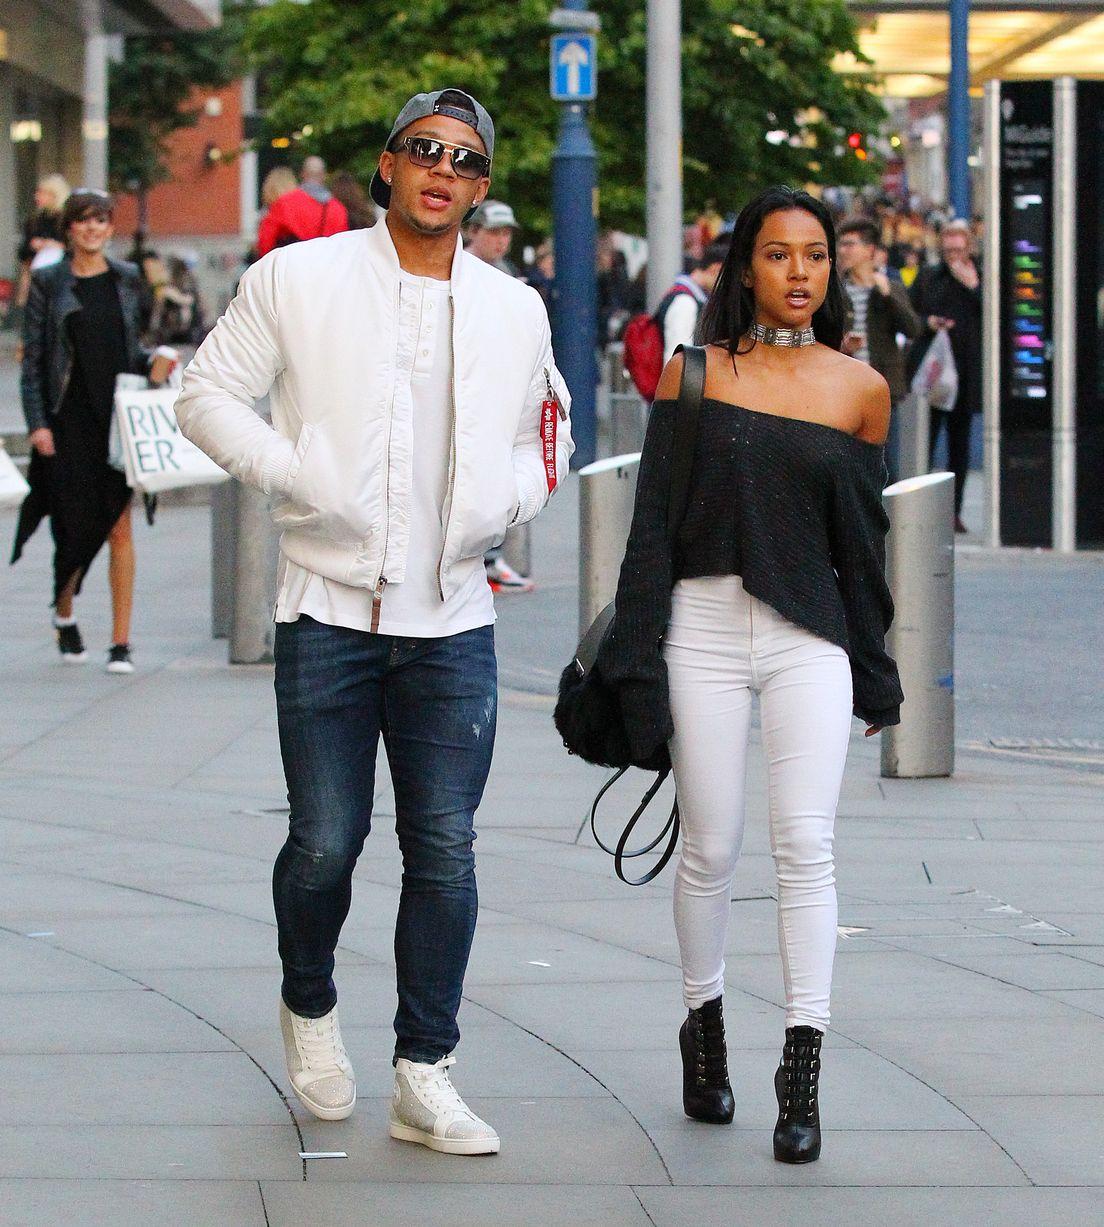 Chloe Bailey & Memphis Depay Dating Rumours Fly After Soccer Star